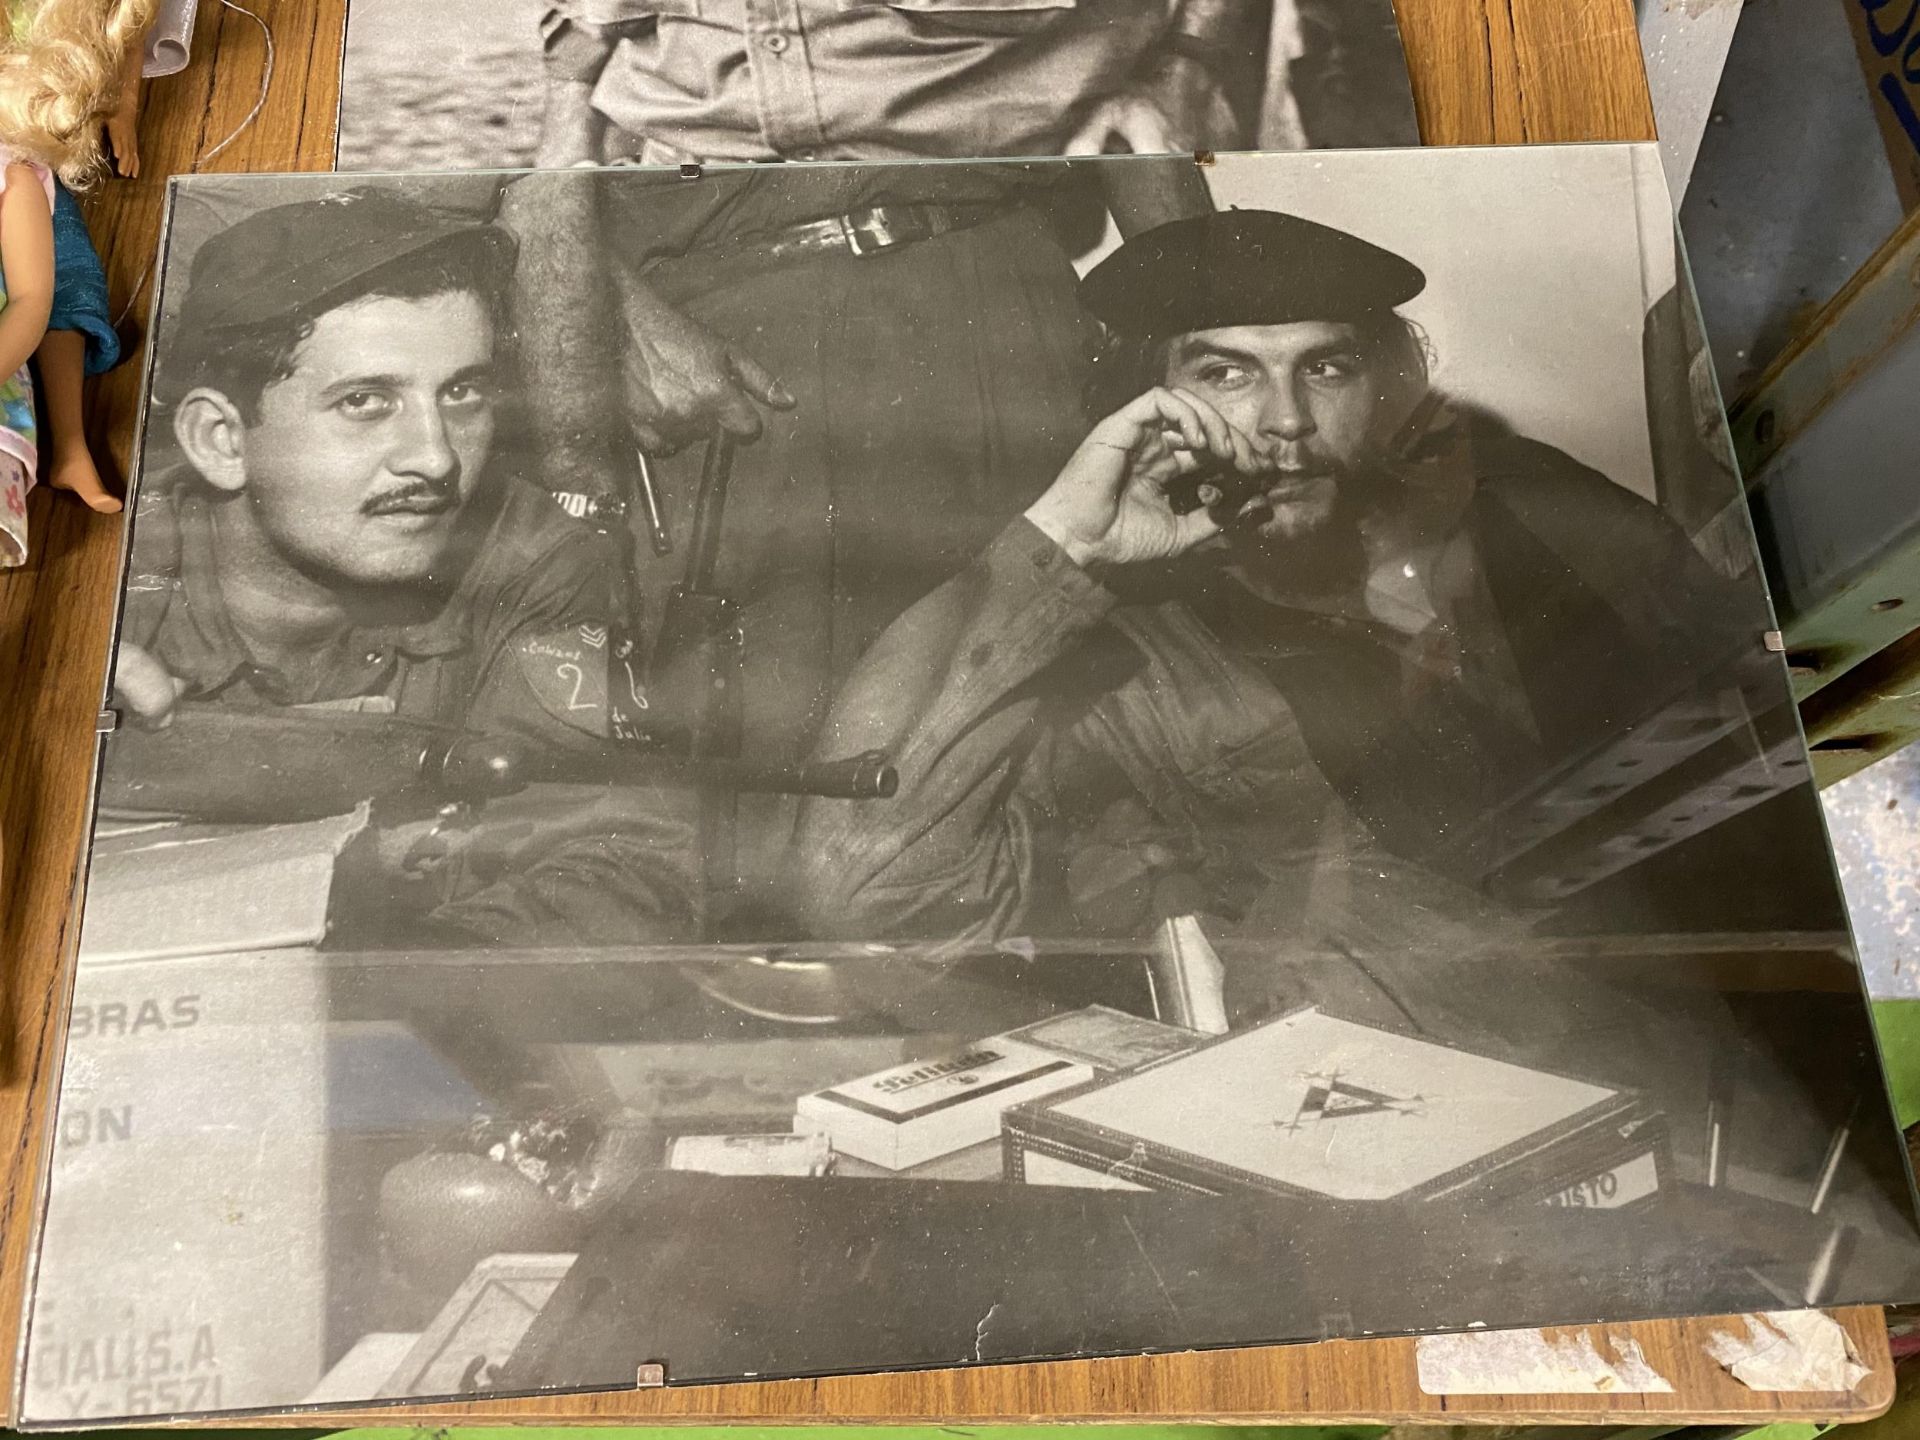 TWO VINTAGE PHOTOGRAPHIC PRINTS OF CHE GUEVARA - Image 2 of 3